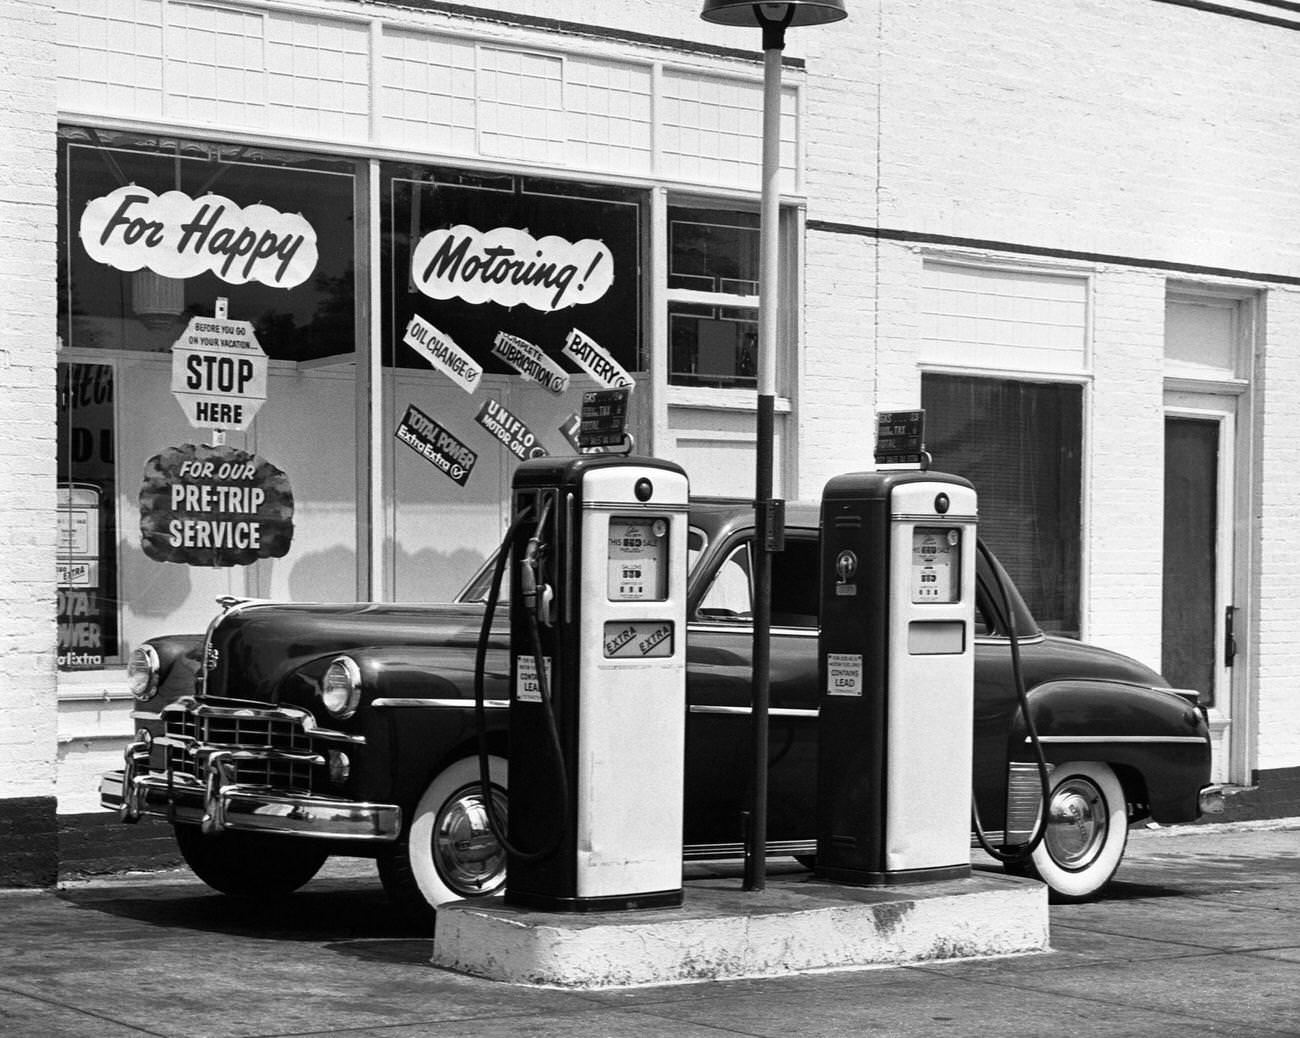 Dodge car in a service station, 1950s.